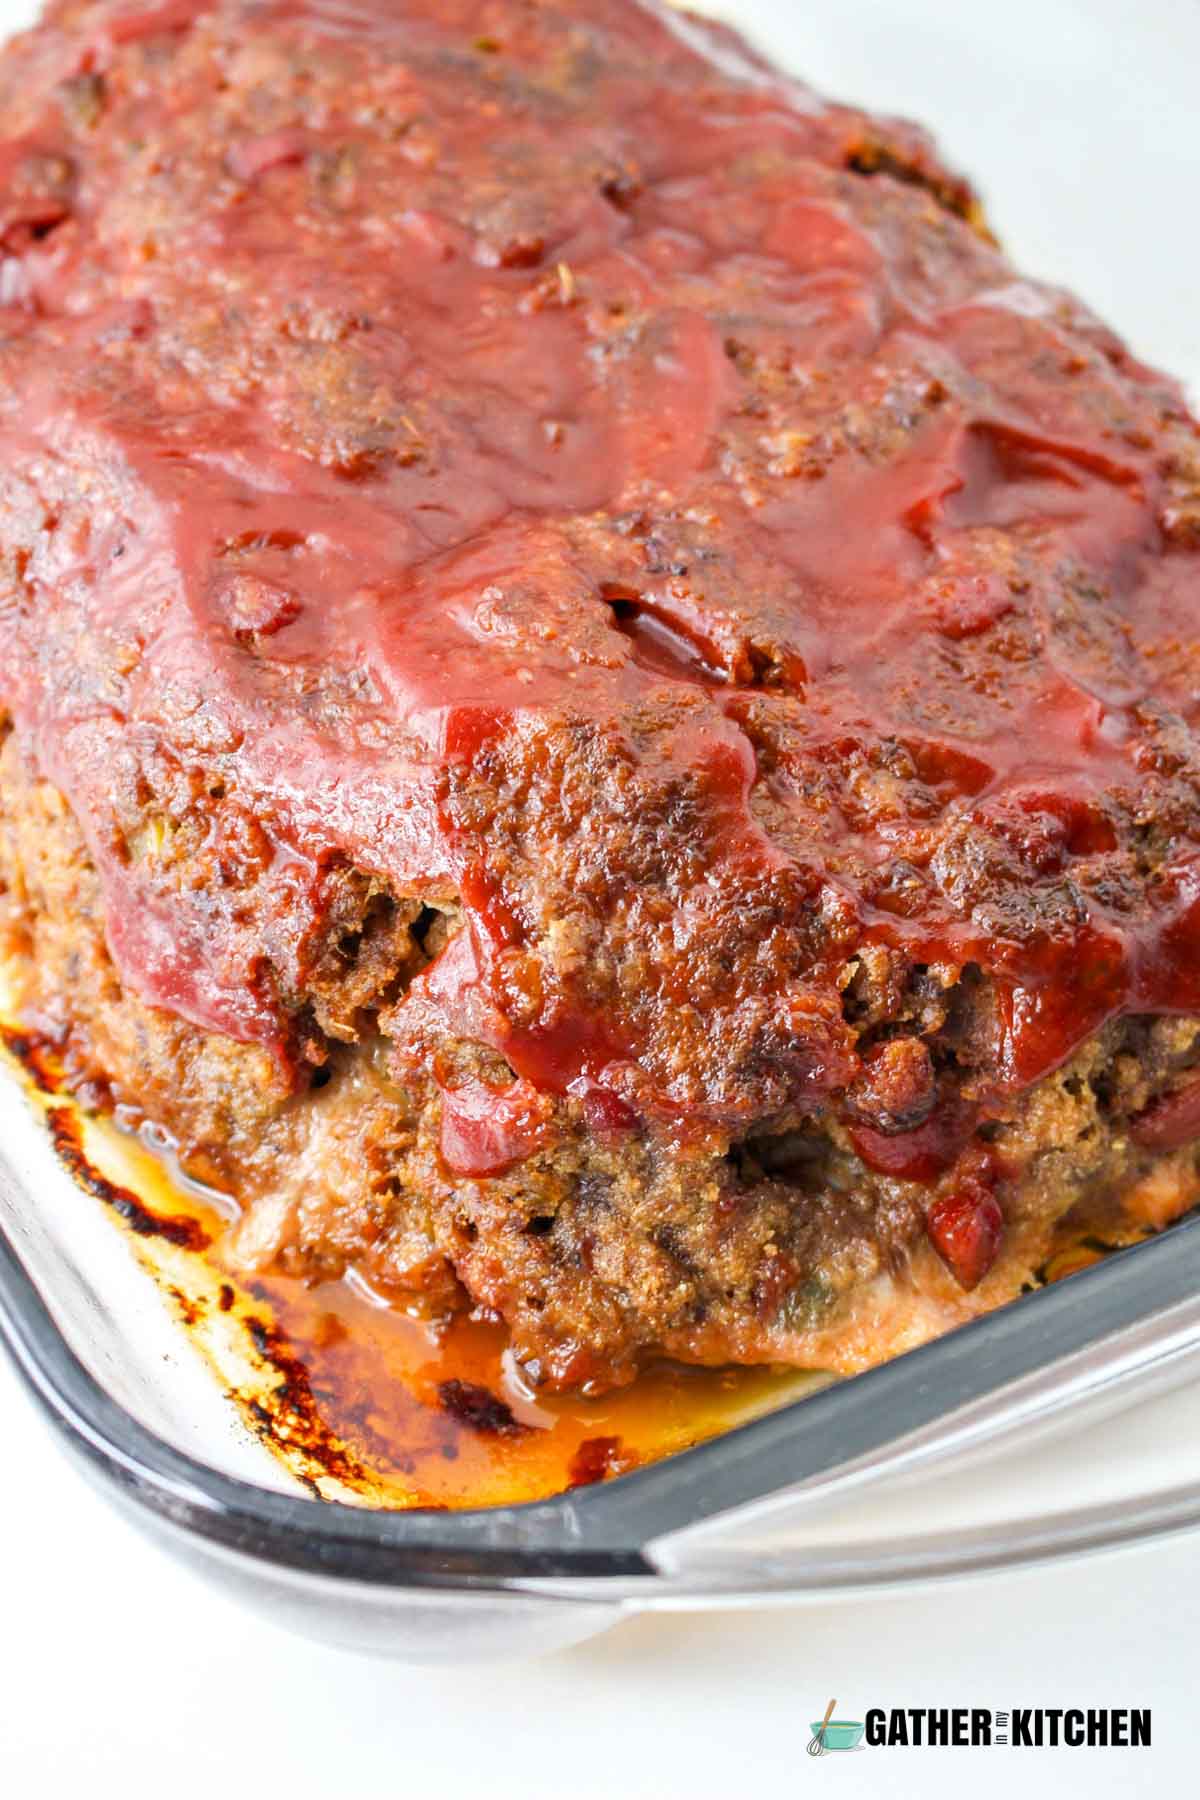 Meatloaf with glaze on top.